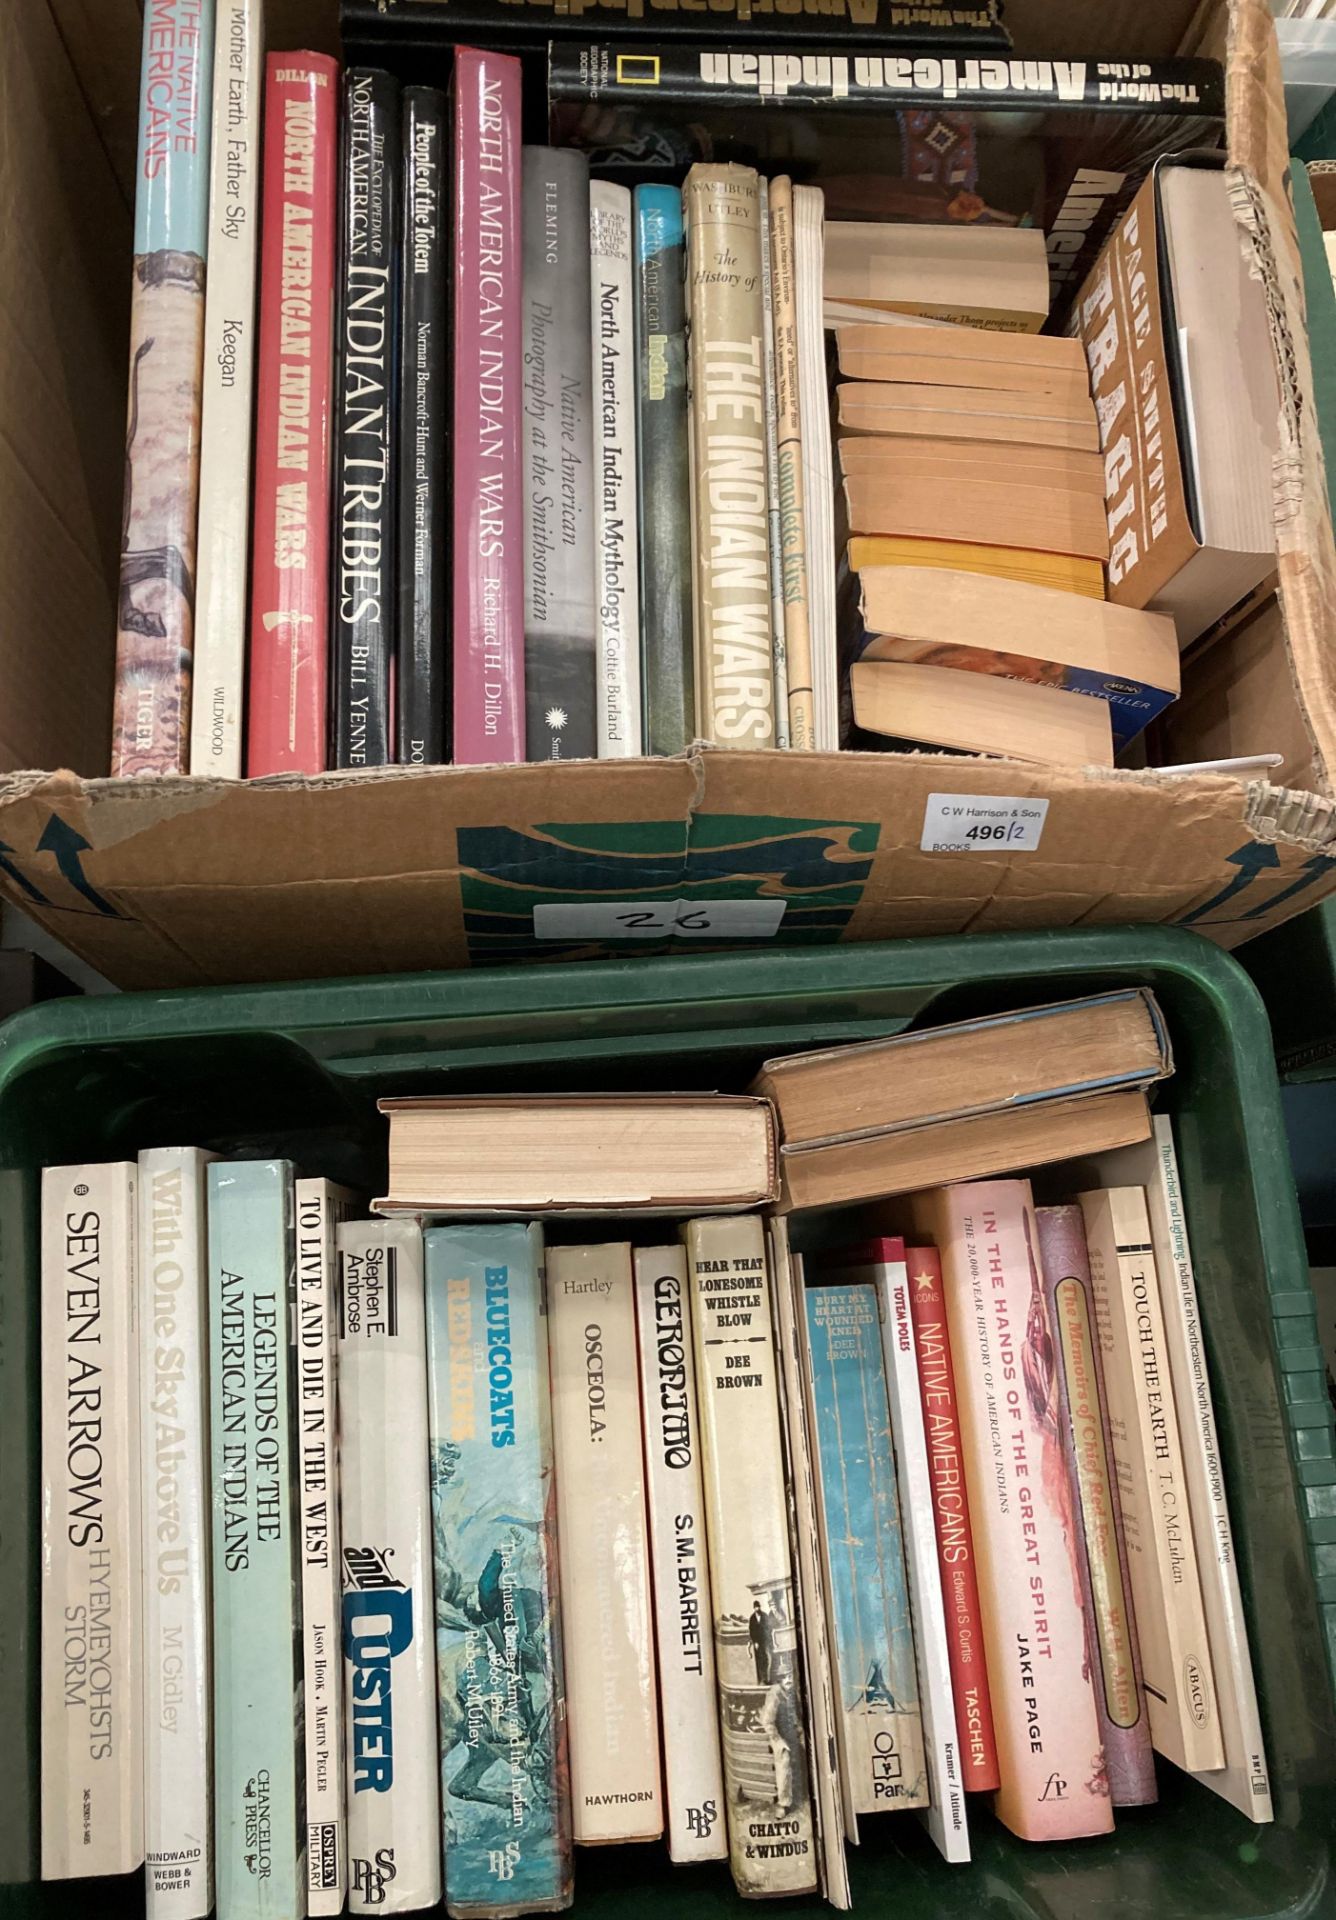 Contents to green plastic crate and box - approximately forty books on Native American Indians,